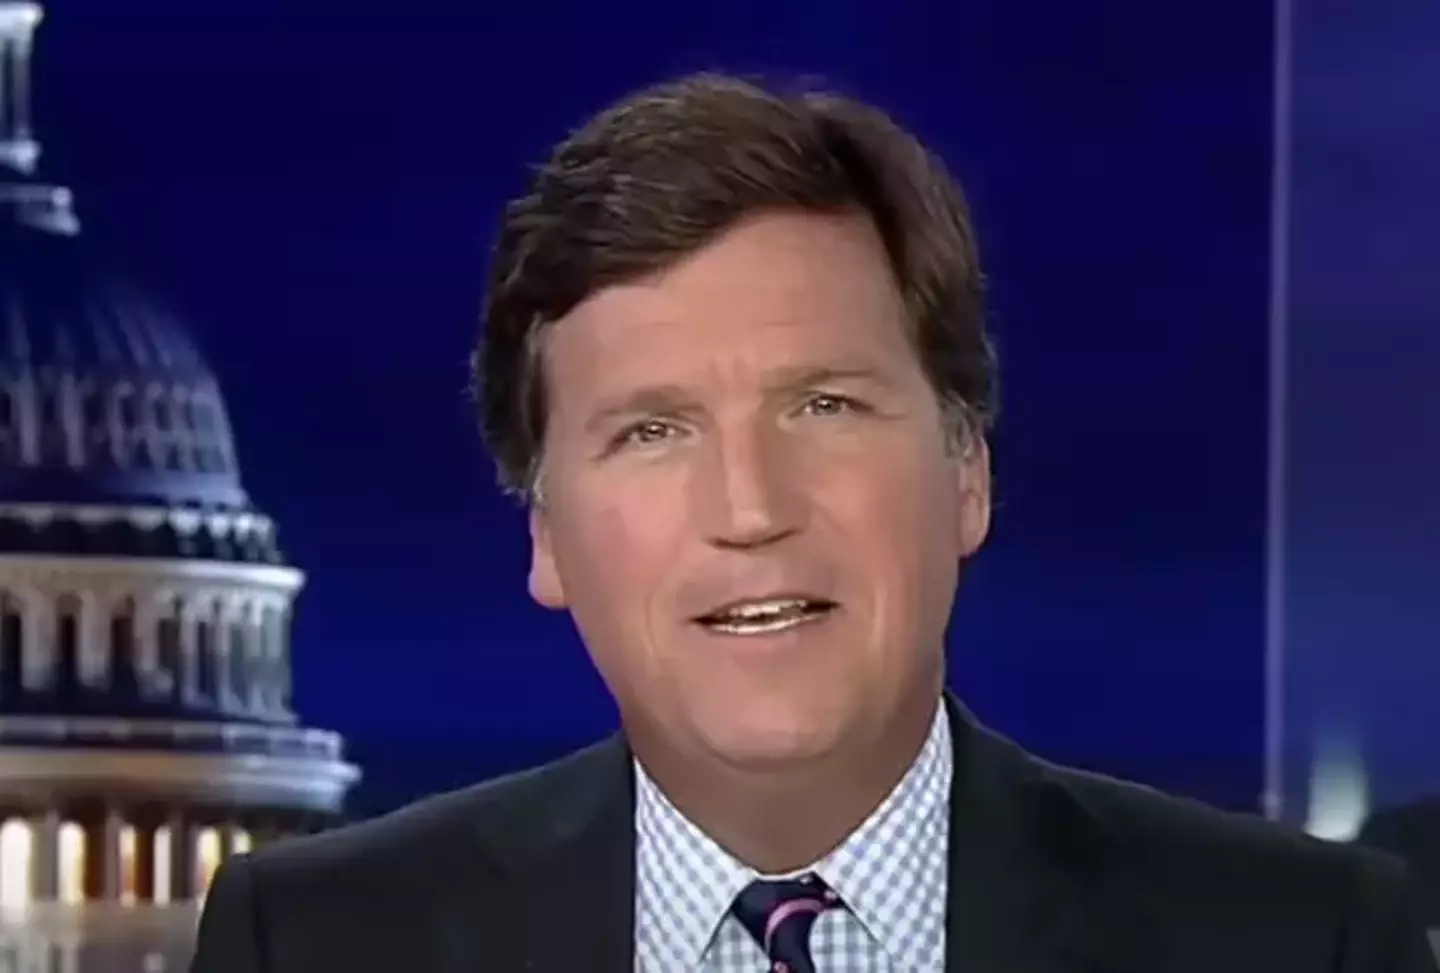 Fox News made the shock announcement on Monday that Tucker Carlson would be leaving the network with immediate effect.